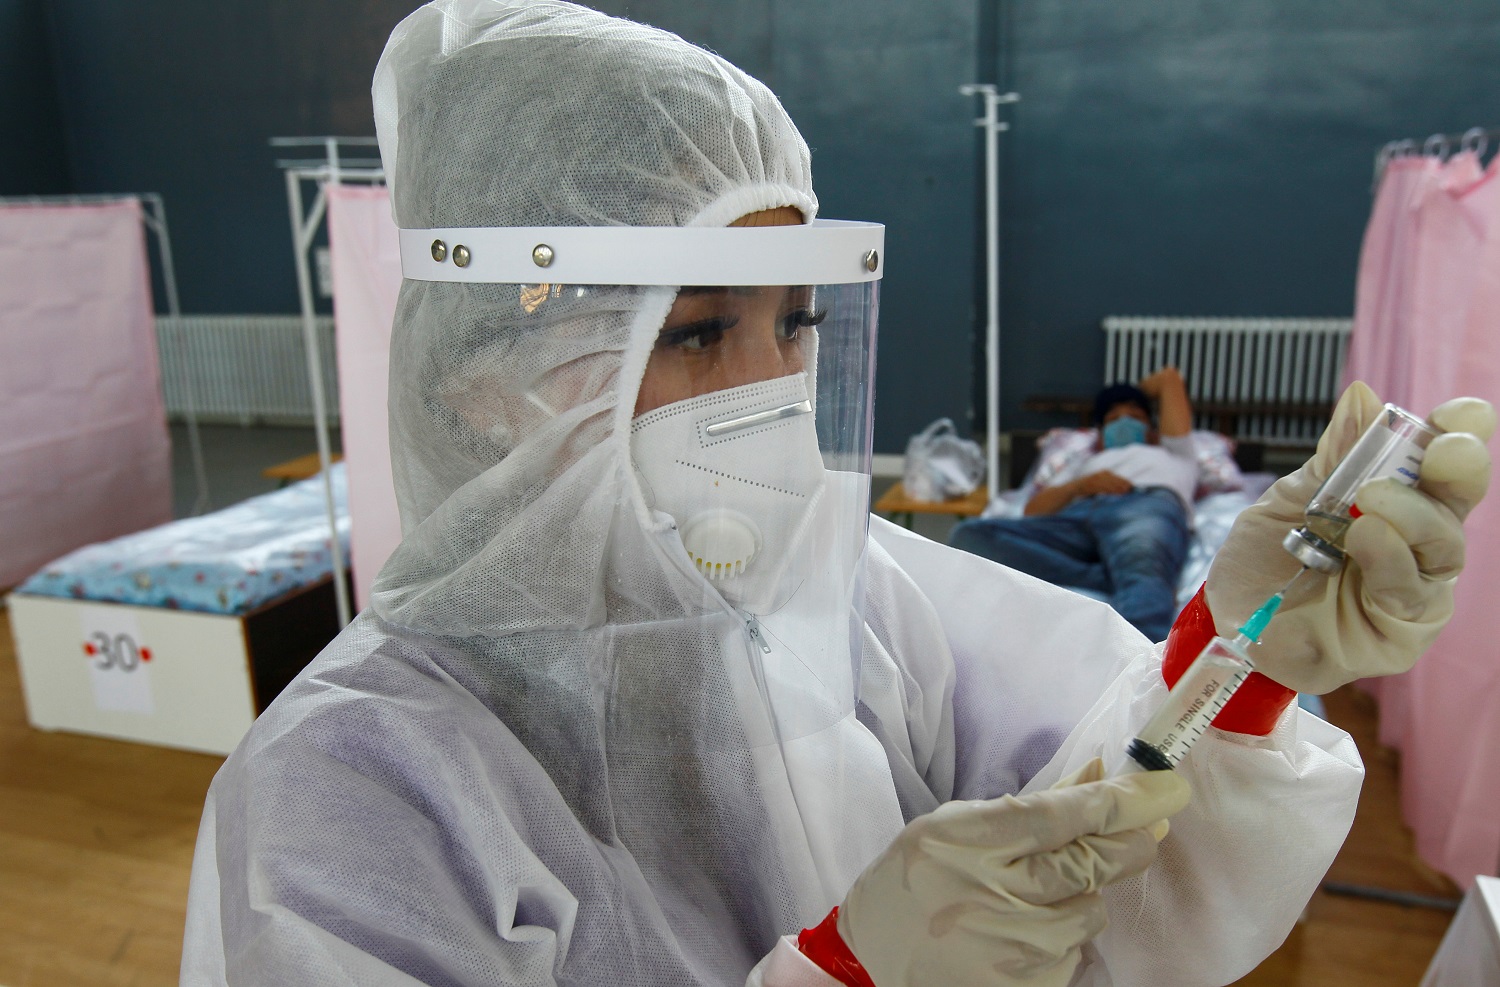 Medical specialists treat patients at a day hospital amid the coronavirus disease (COVID-19) outbreak in Bishkek